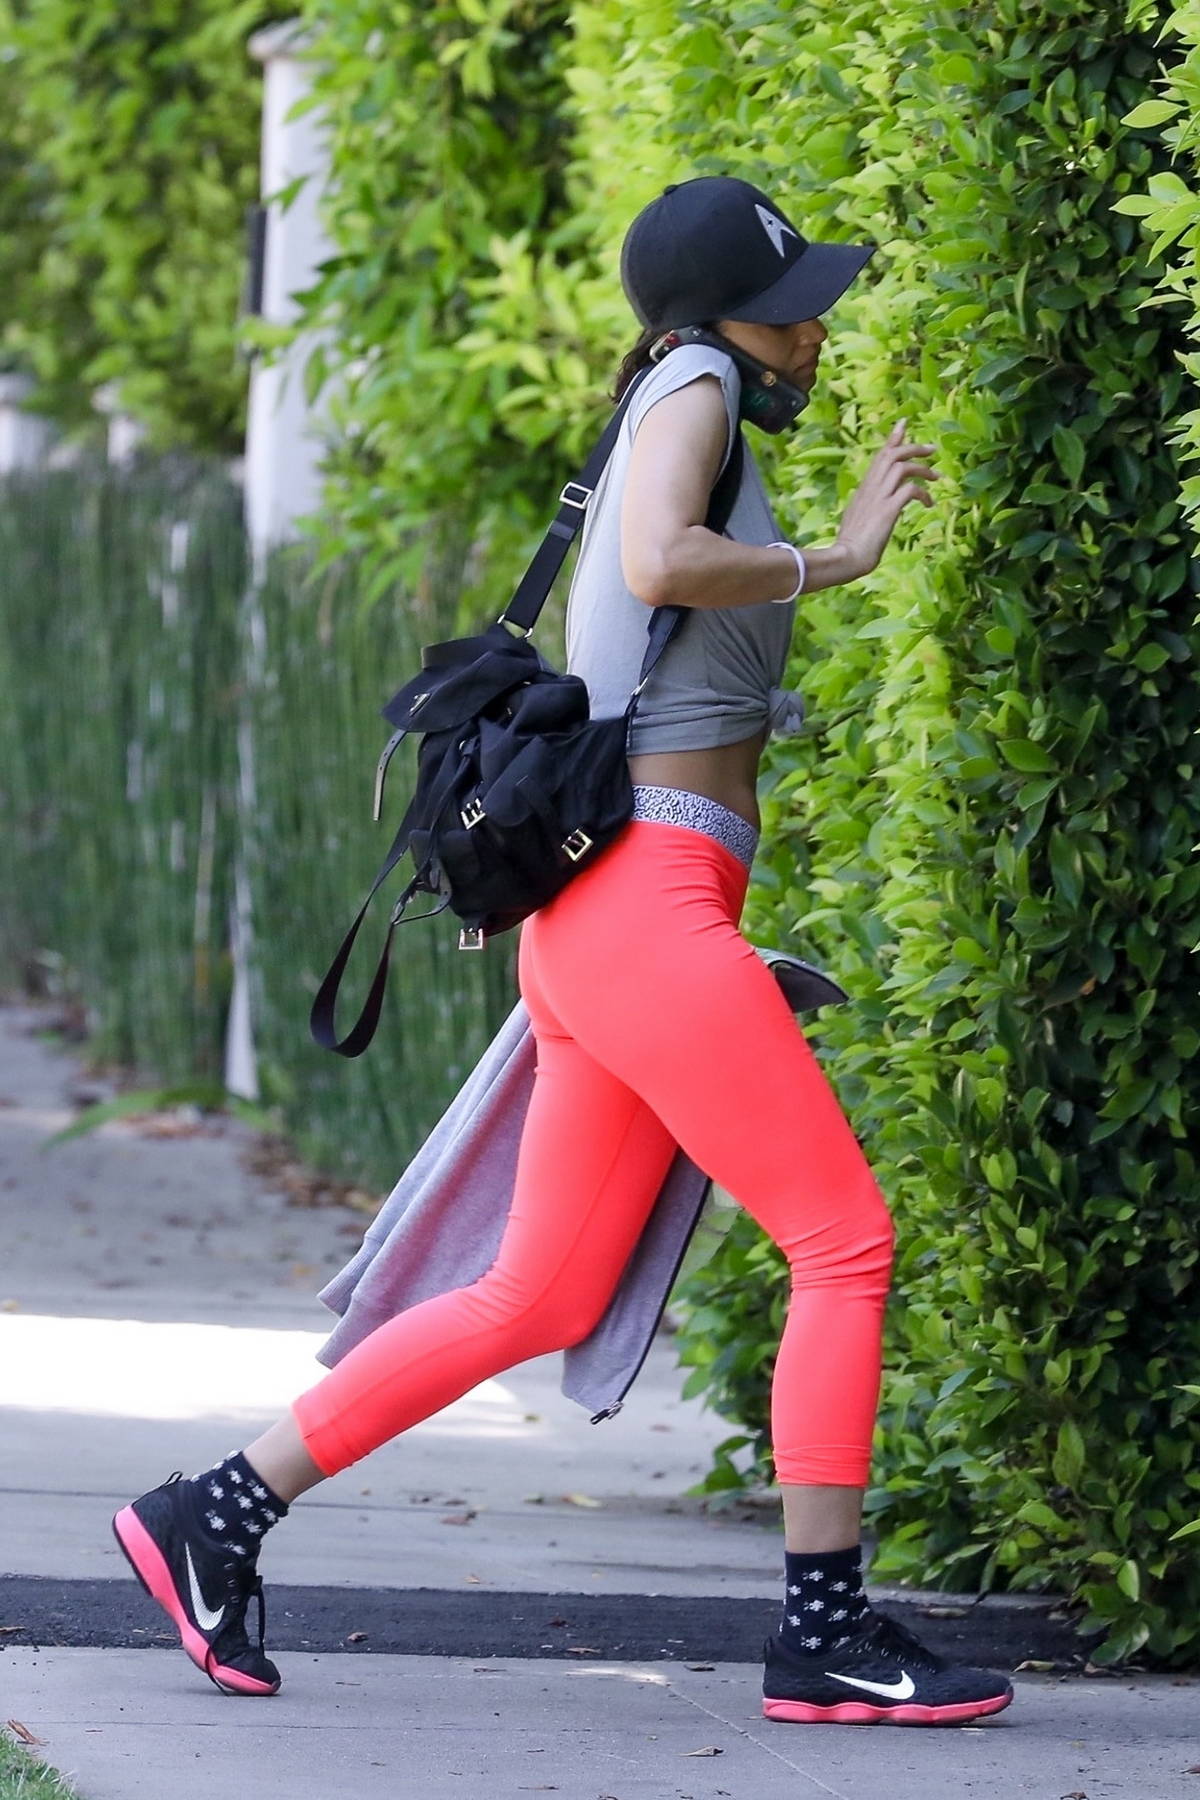 Sofia Boutella displays her abs as she dons a black tee and colorful  leggings for her